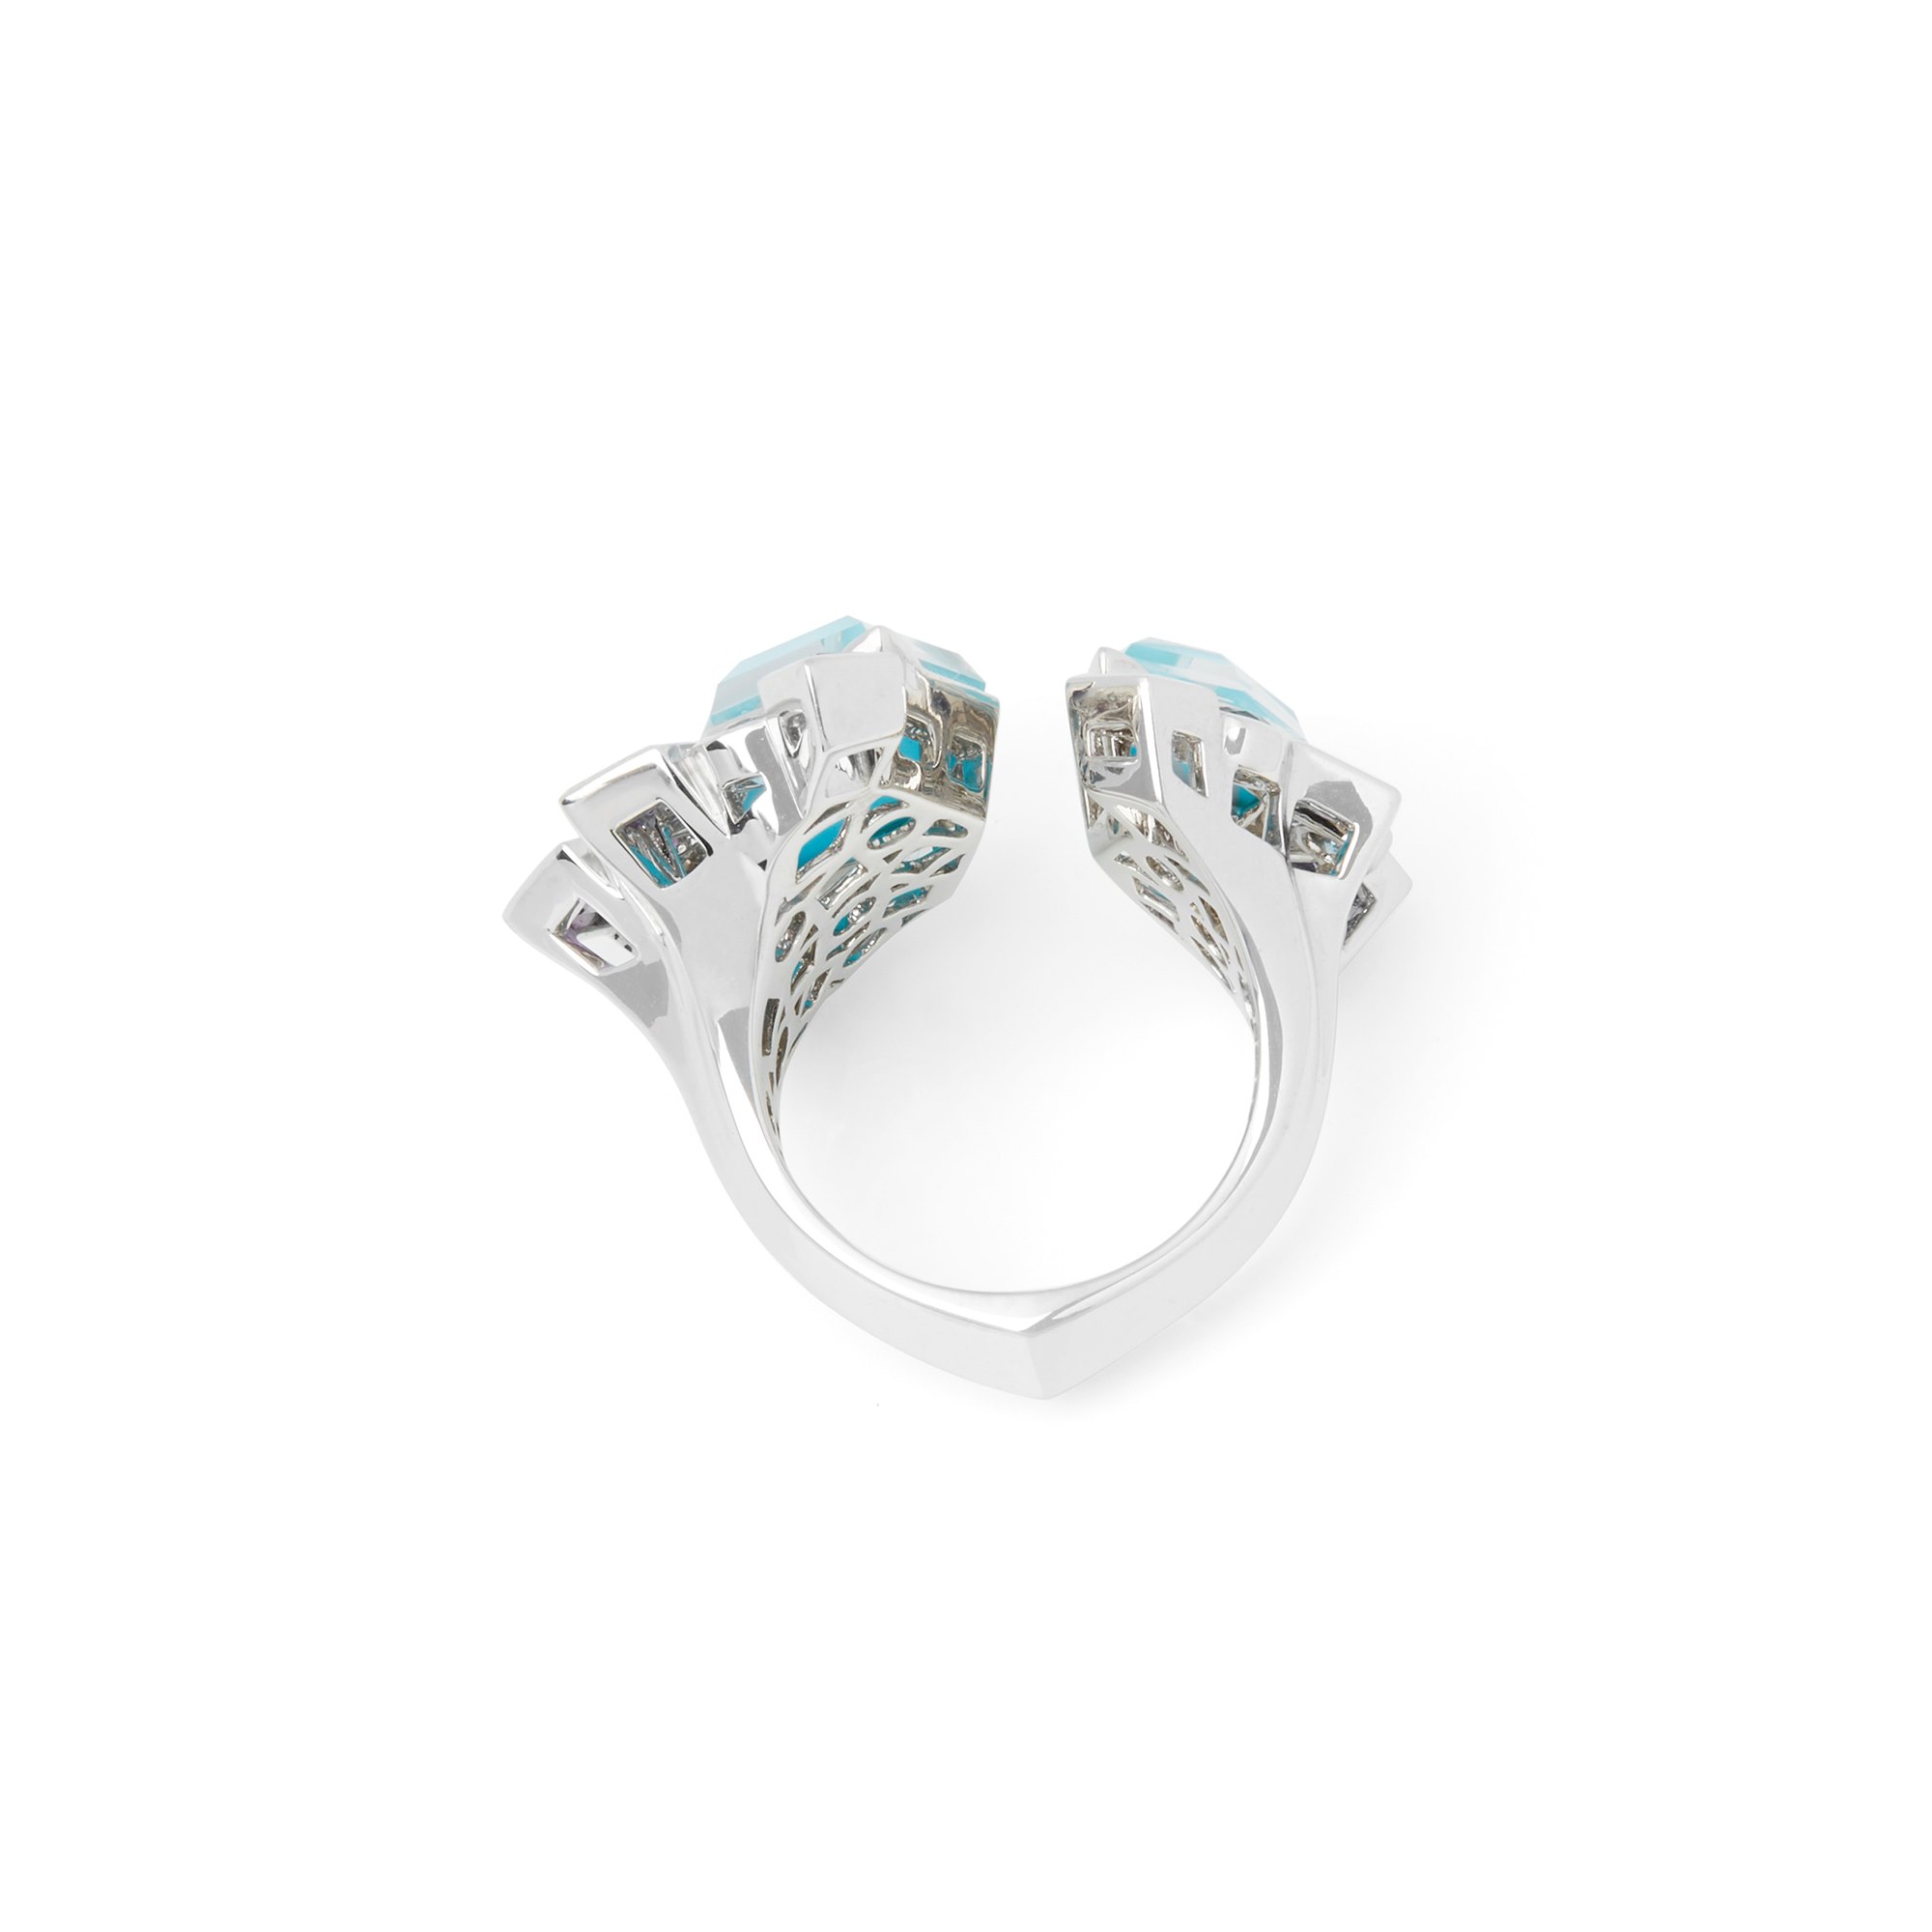 Stephen Webster 18ct White Gold Struck Crystal Haze Turquoise Open Ring